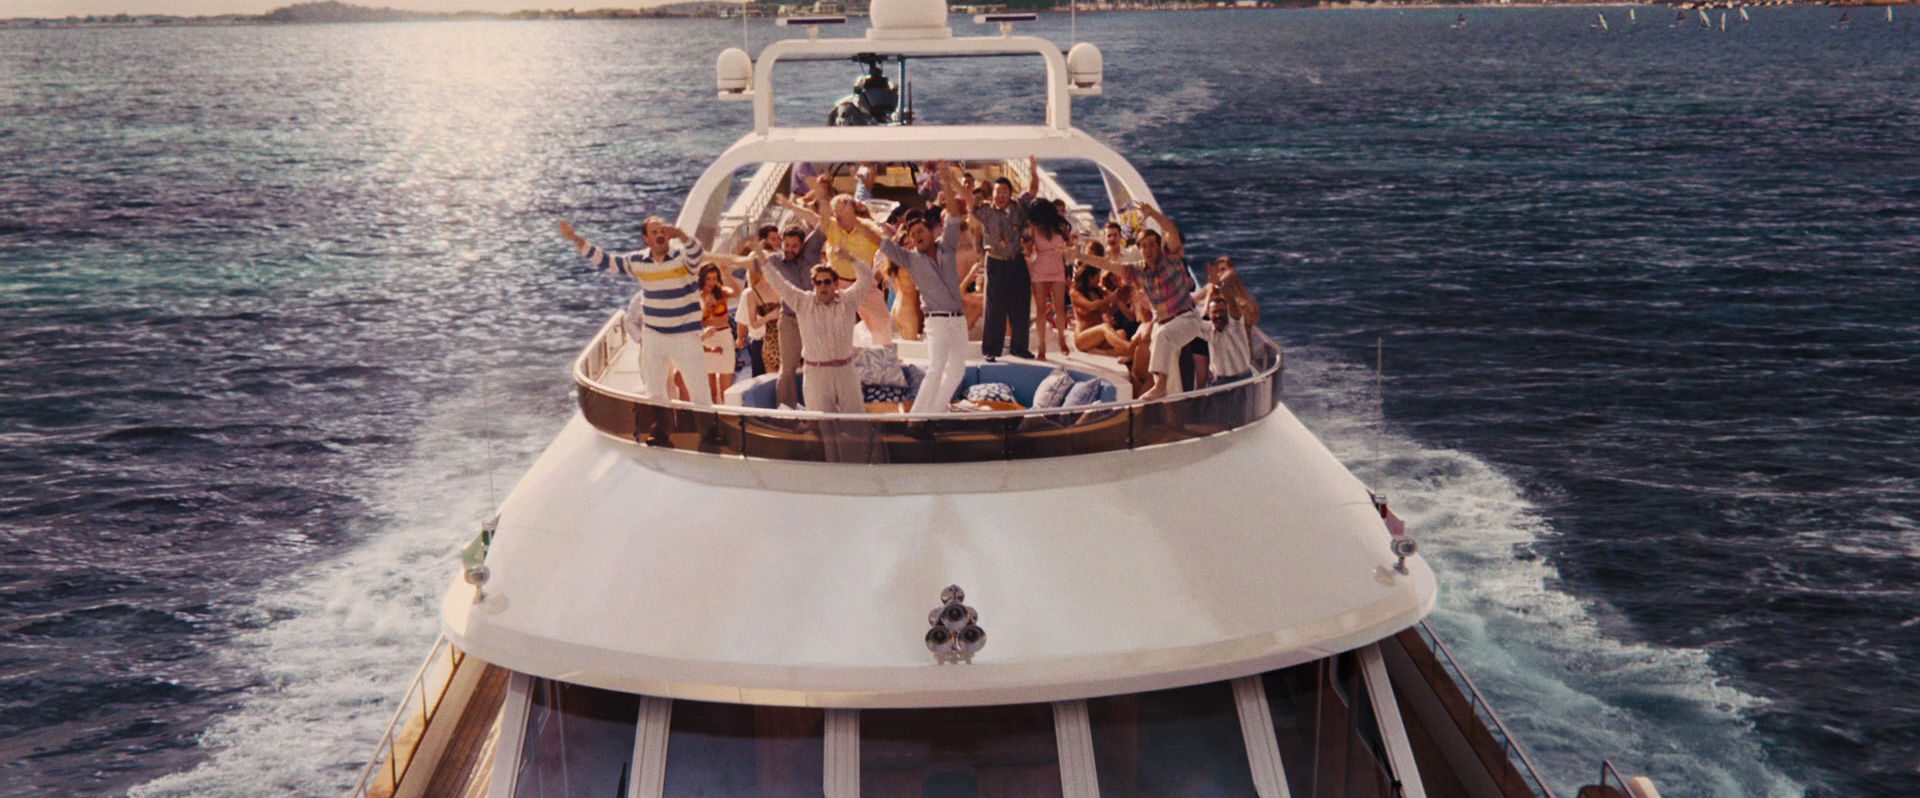 is the yacht scene from wolf of wall street real